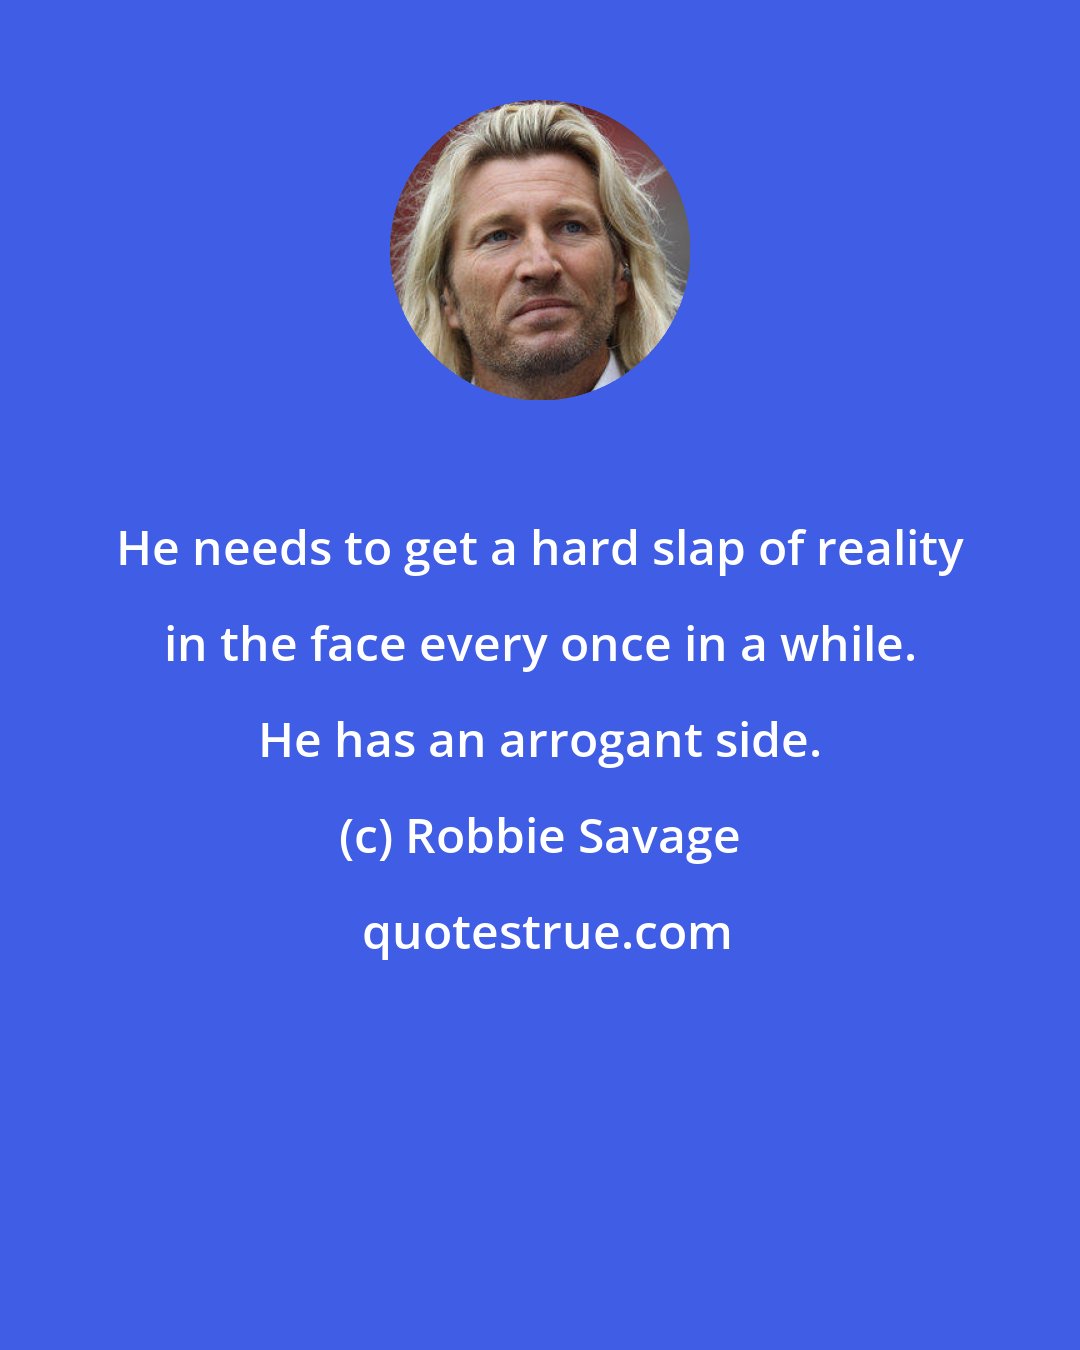 Robbie Savage: He needs to get a hard slap of reality in the face every once in a while. He has an arrogant side.